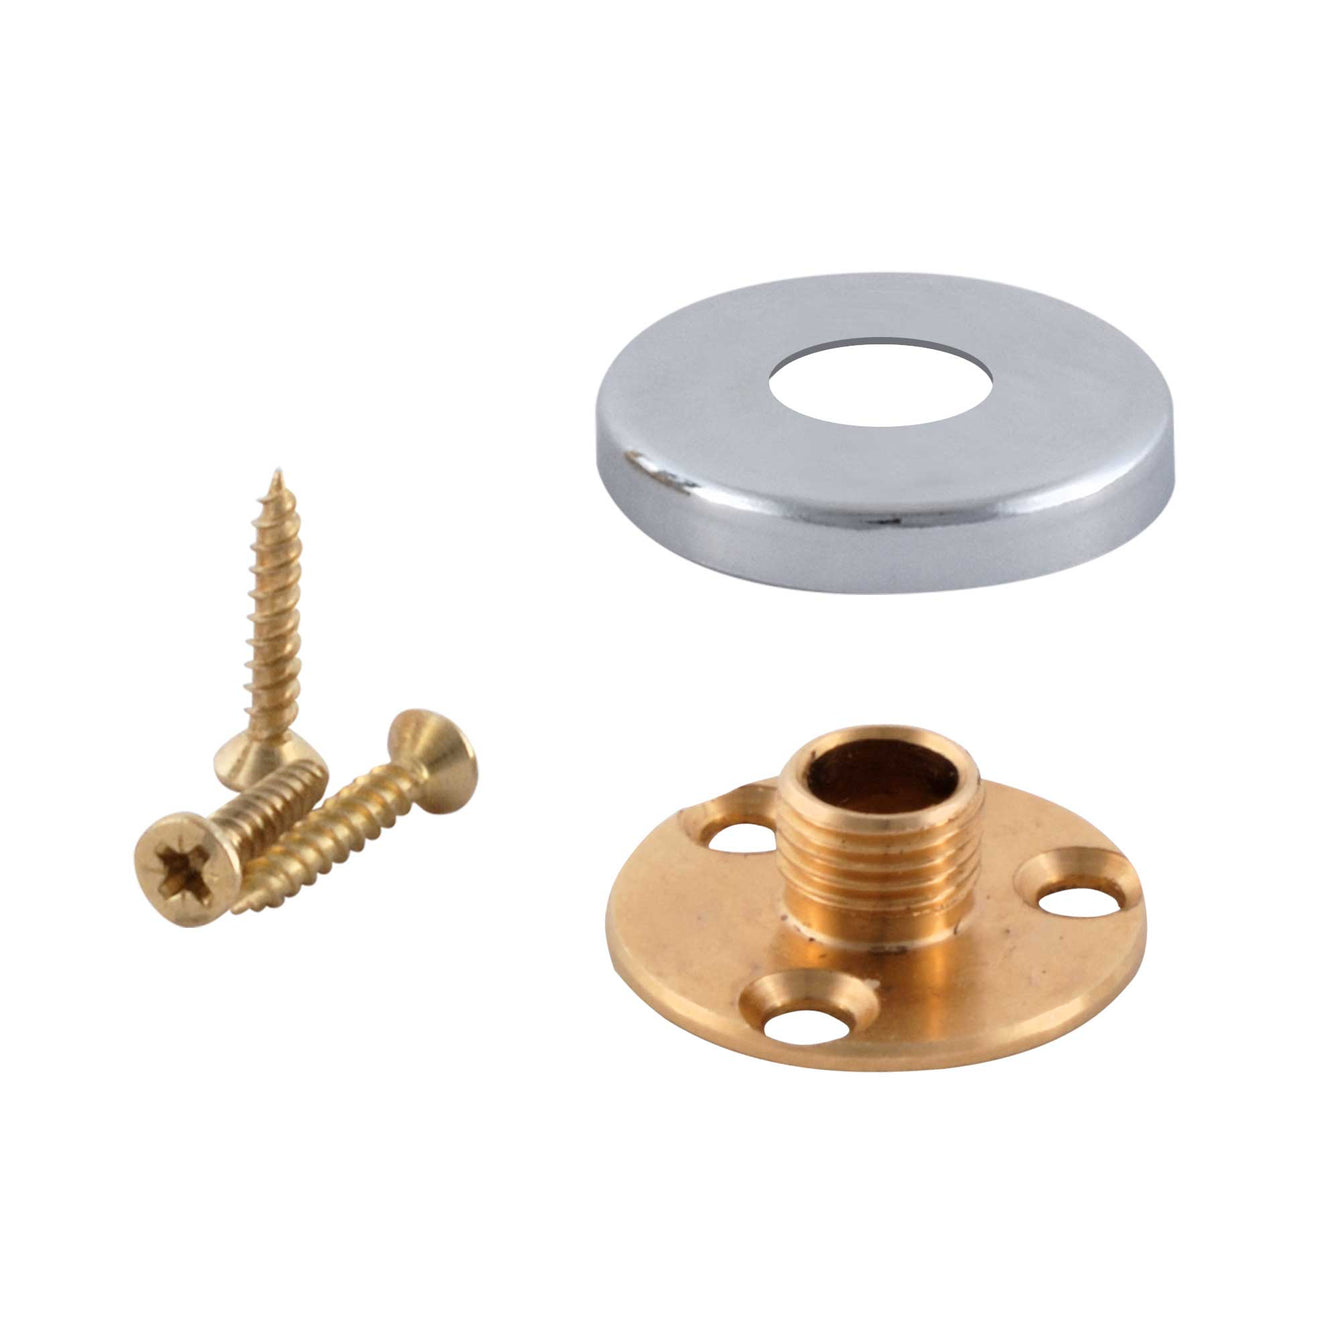 ElekTek Male Thread Back Plate Mount Cover and Screws - For use with B22 E27 Lamp holders Chrome / 10mm